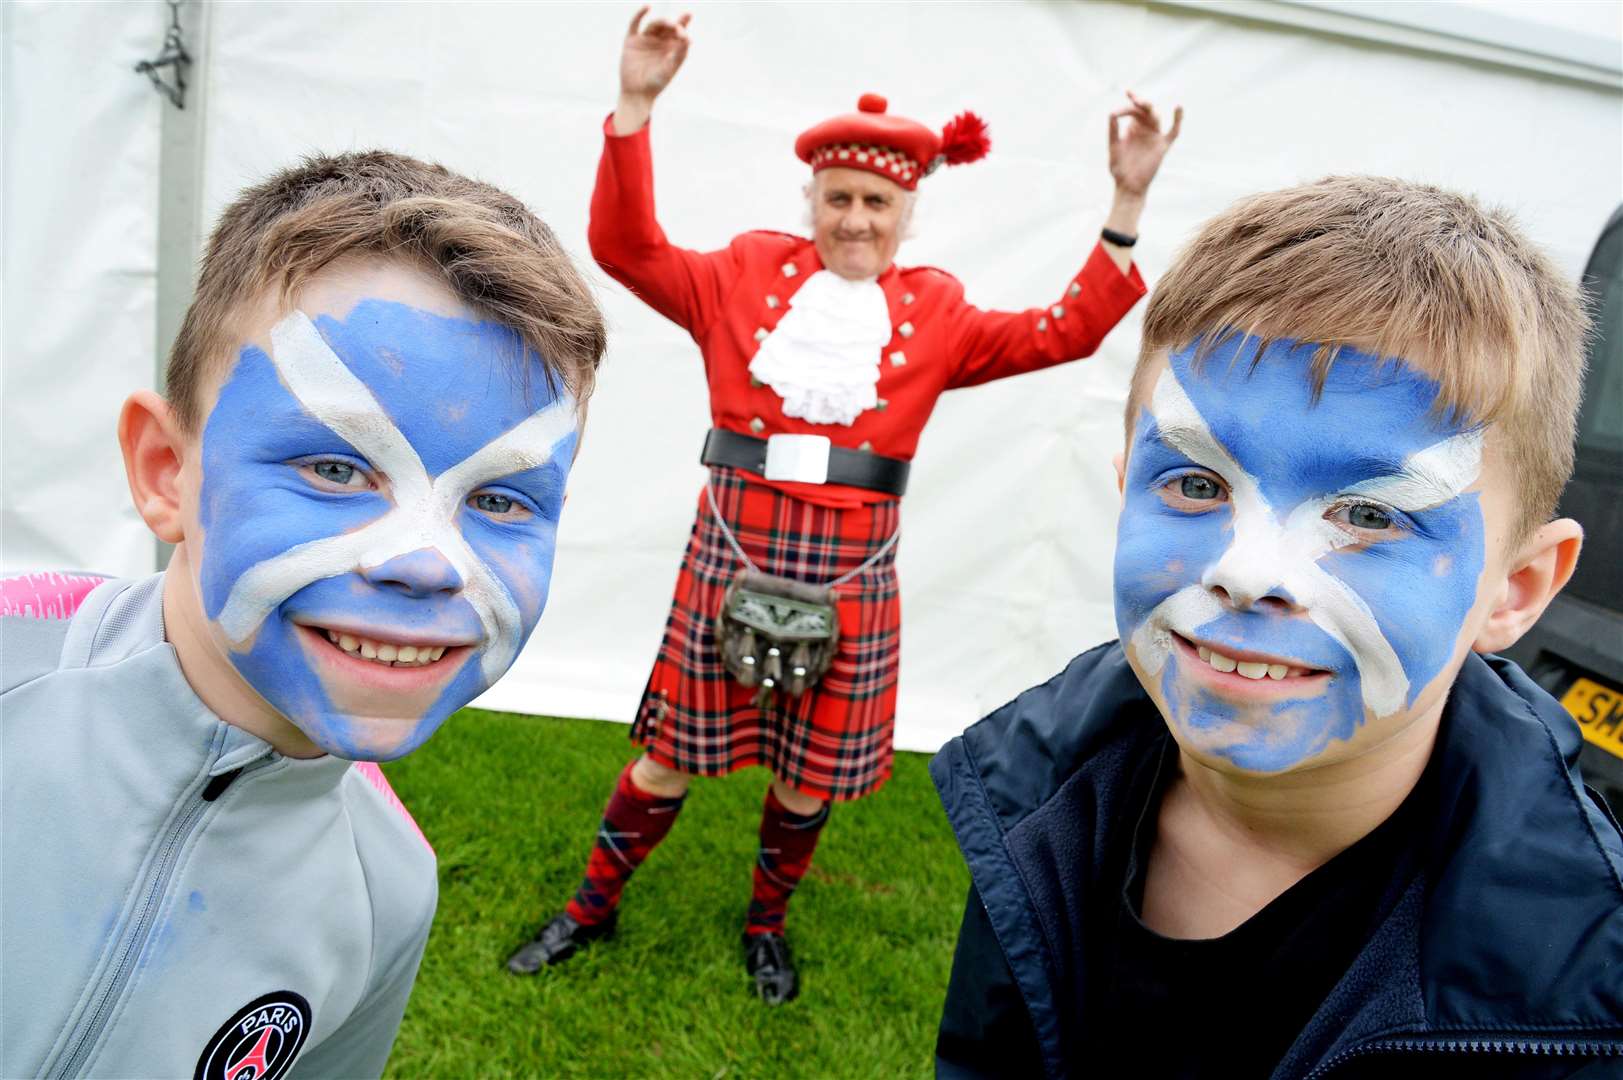 Painted for Scotland were brothers Ally Sutherland (6) and Donnie Sutherland (8) (right) and dressed for Scotland was Gerald Dunlop in MacFarlane tartan....Inverness Highland Games.Picture: Gair Fraser. Image No. 044467..